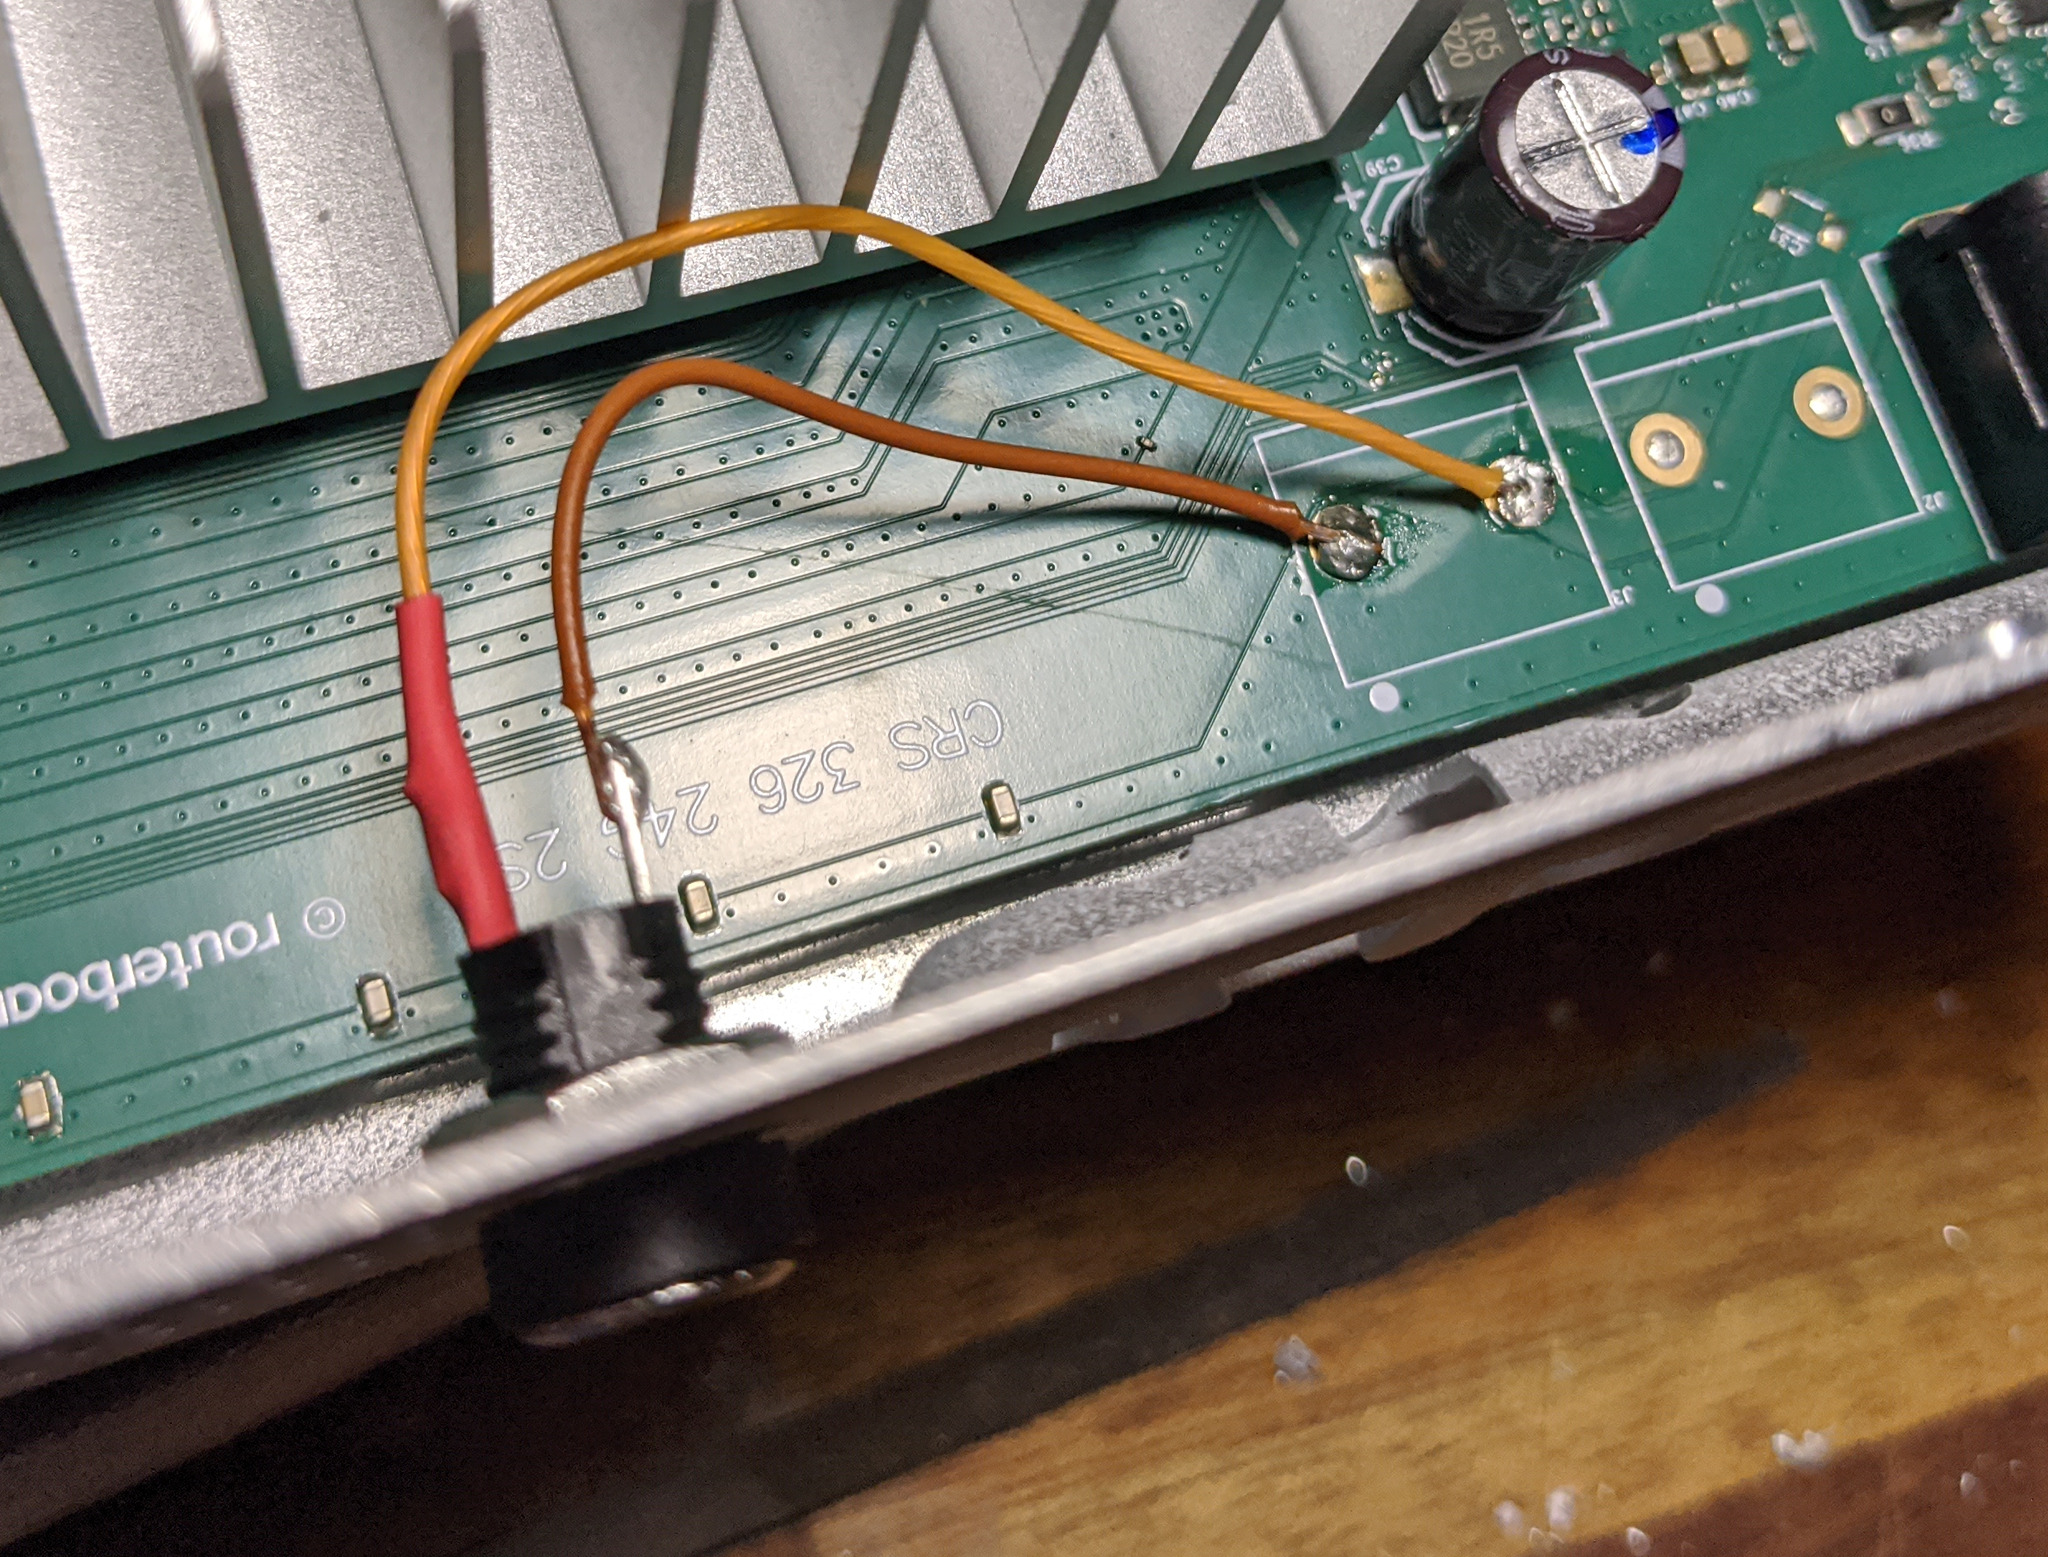 power socket soldered to the board with wires